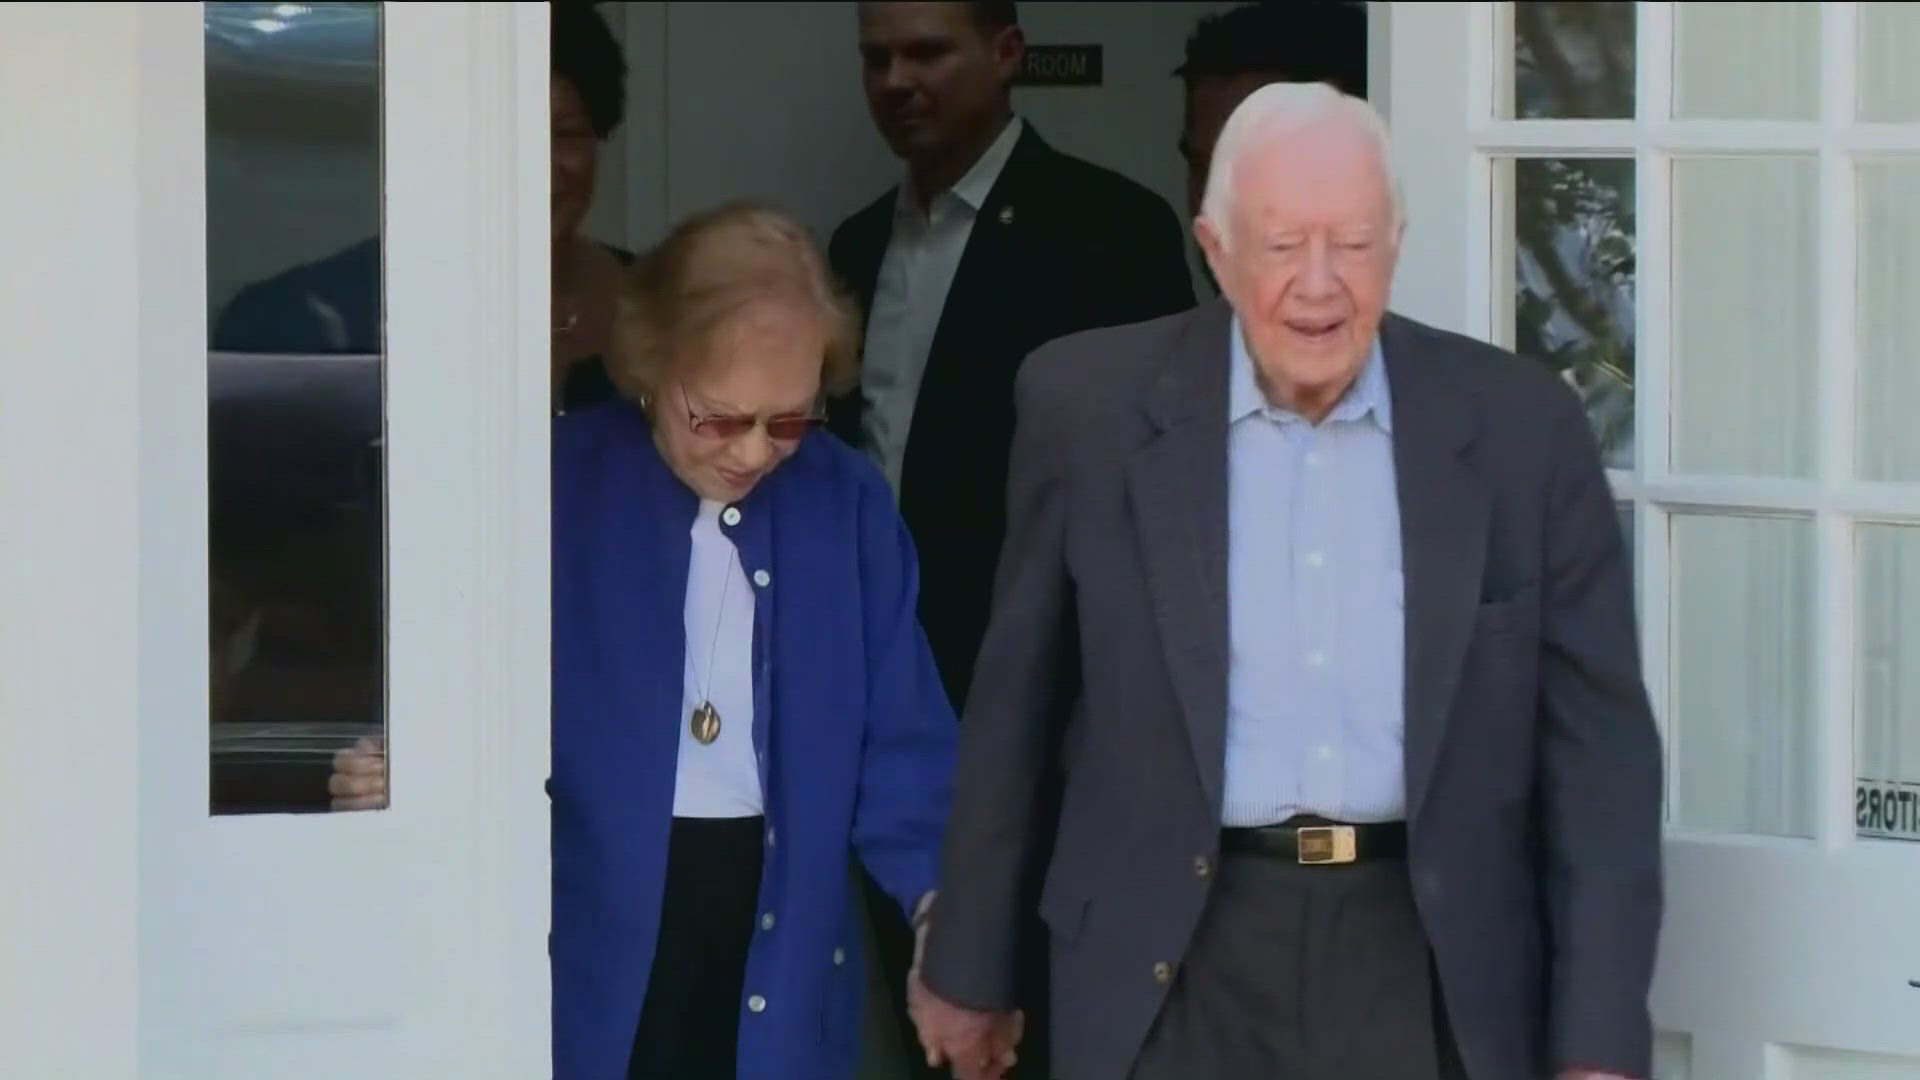 Jason Carter gave a brief update about former President Jimmy Carter on Tuesday at the Rosalynn Carter Georgia Mental Health Forum.